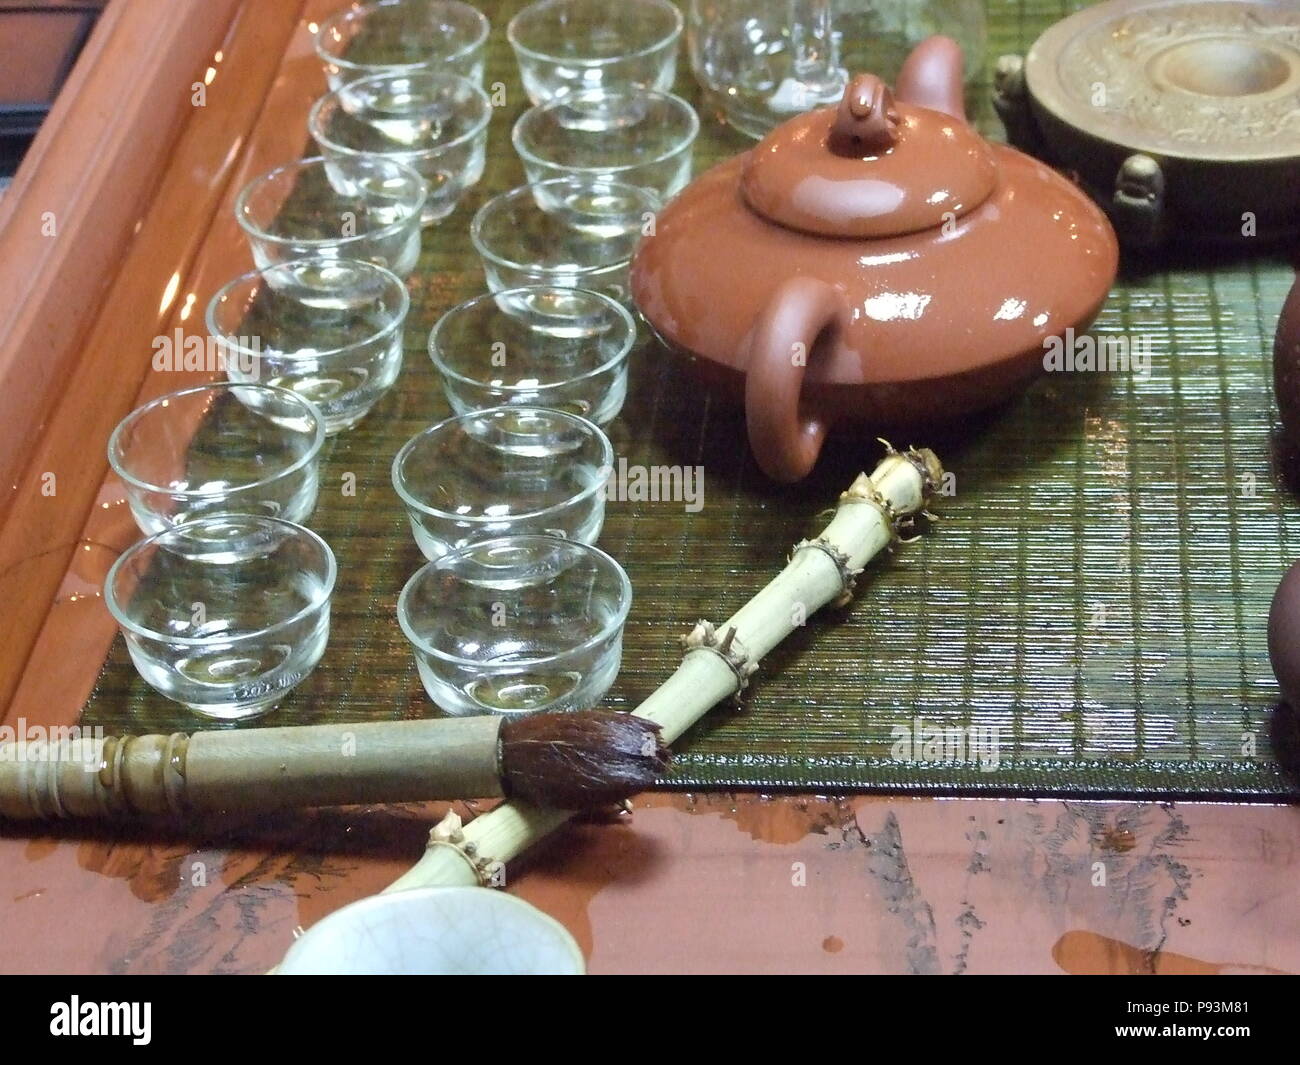 Teapot and brushes in a tea ceremony in China Stock Photo